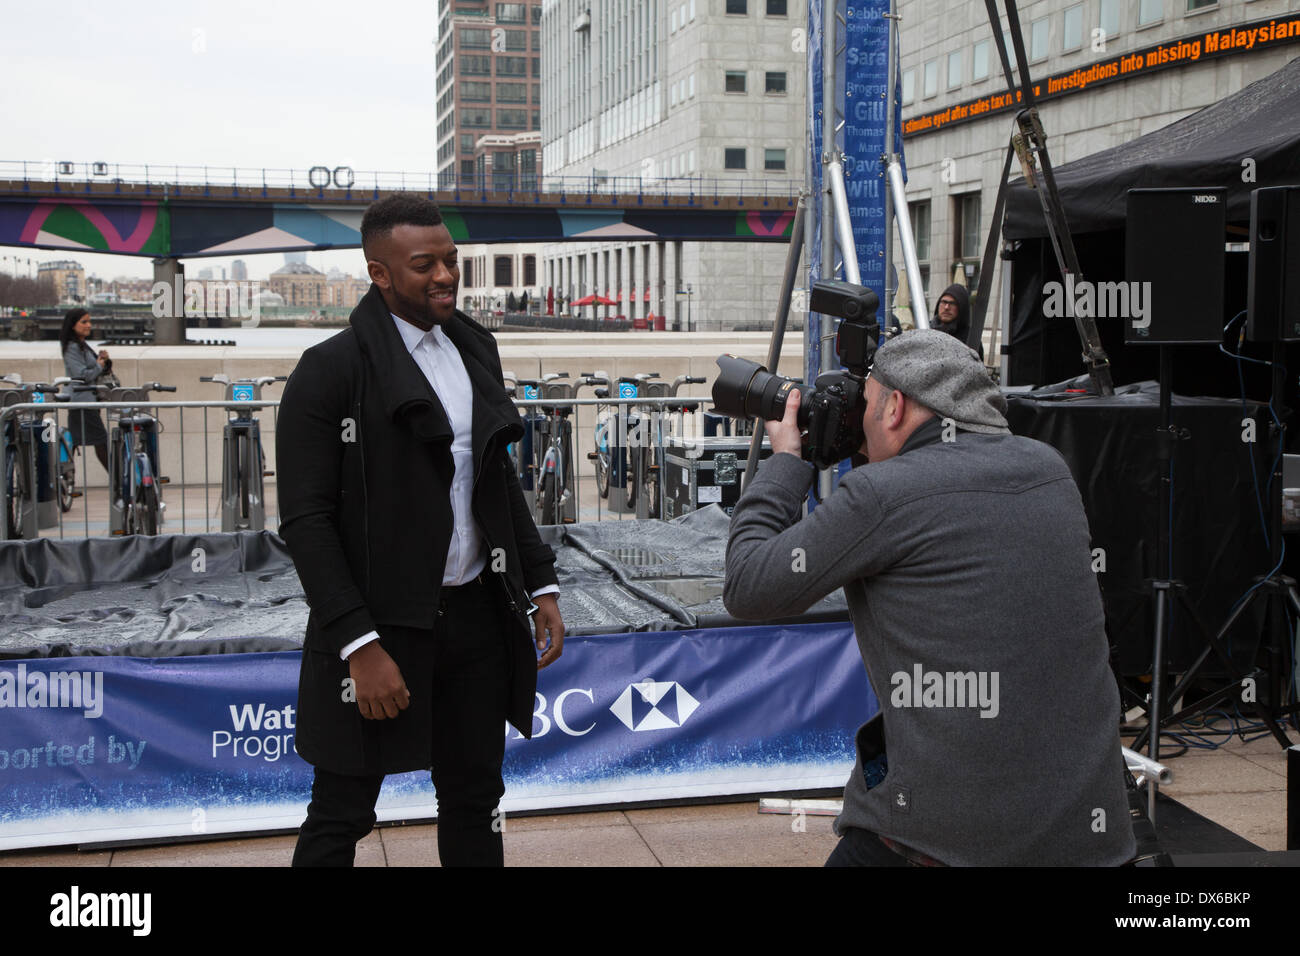 London, UK, 19th Mar, 2014. JLS star Oritsé Williams launches Water Aid's campaign by adding first 'watergraph' to pledge his support for World Water Day outside the Canary Wharf Tube station. Credit:  Steve Bright/Alamy Live News Stock Photo